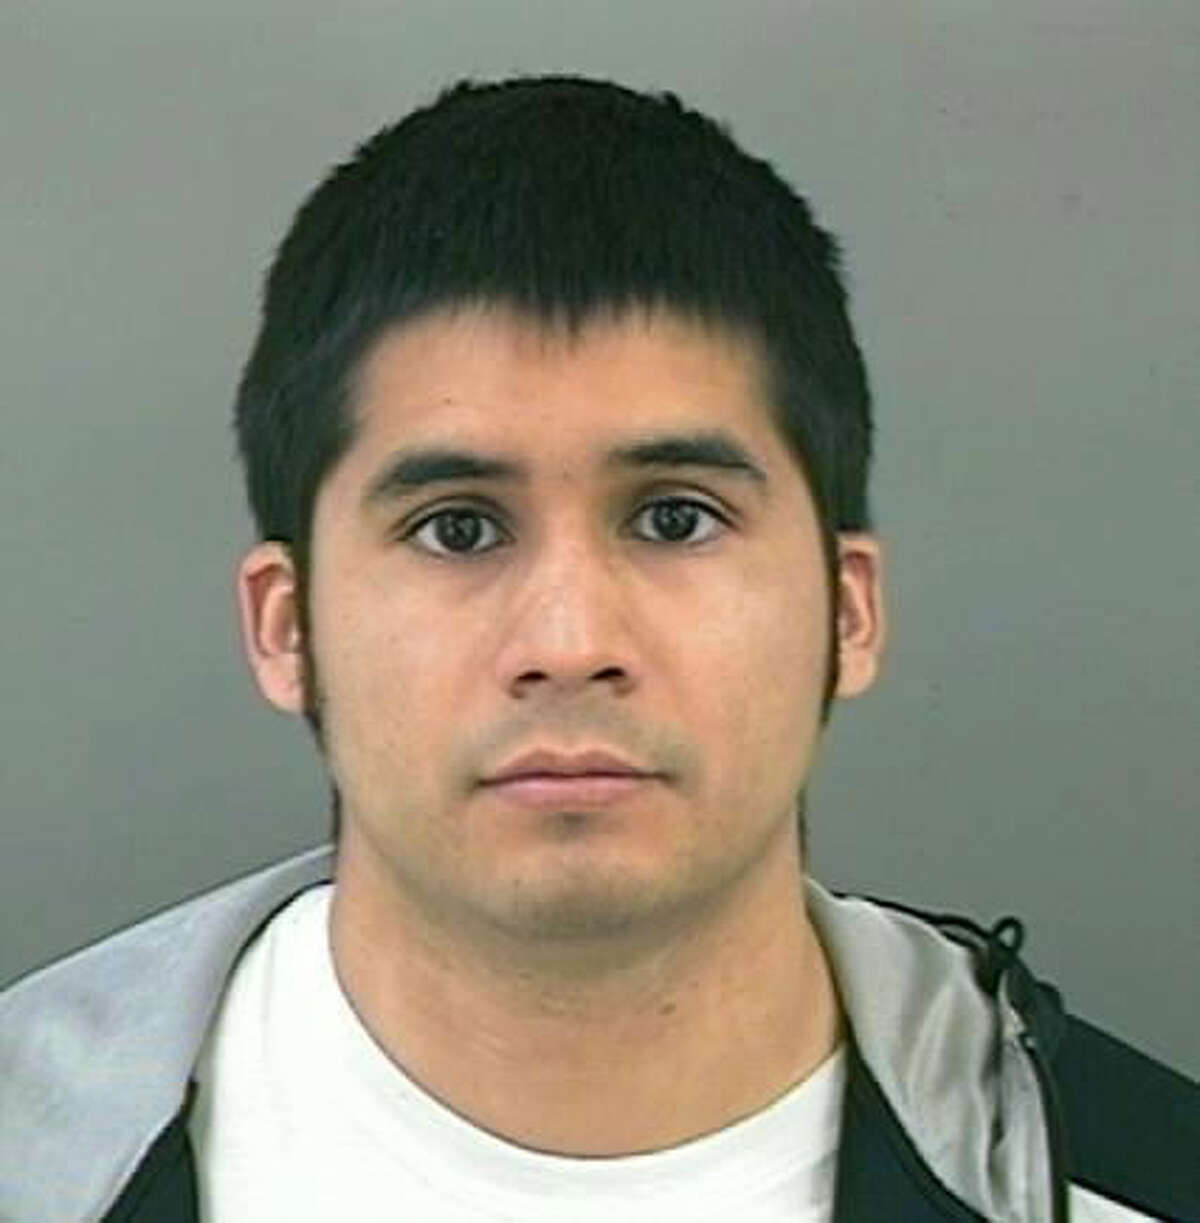 Christopher Miranda, a former teacher and gymnastics coach at Eastwood High School, faces two felony counts of sexual assault of a child. three counts of improper relationship between a student and educator and three counts of sexual performance by a child. Each count carries a maximum 20-year sentence and $10,000 fine.